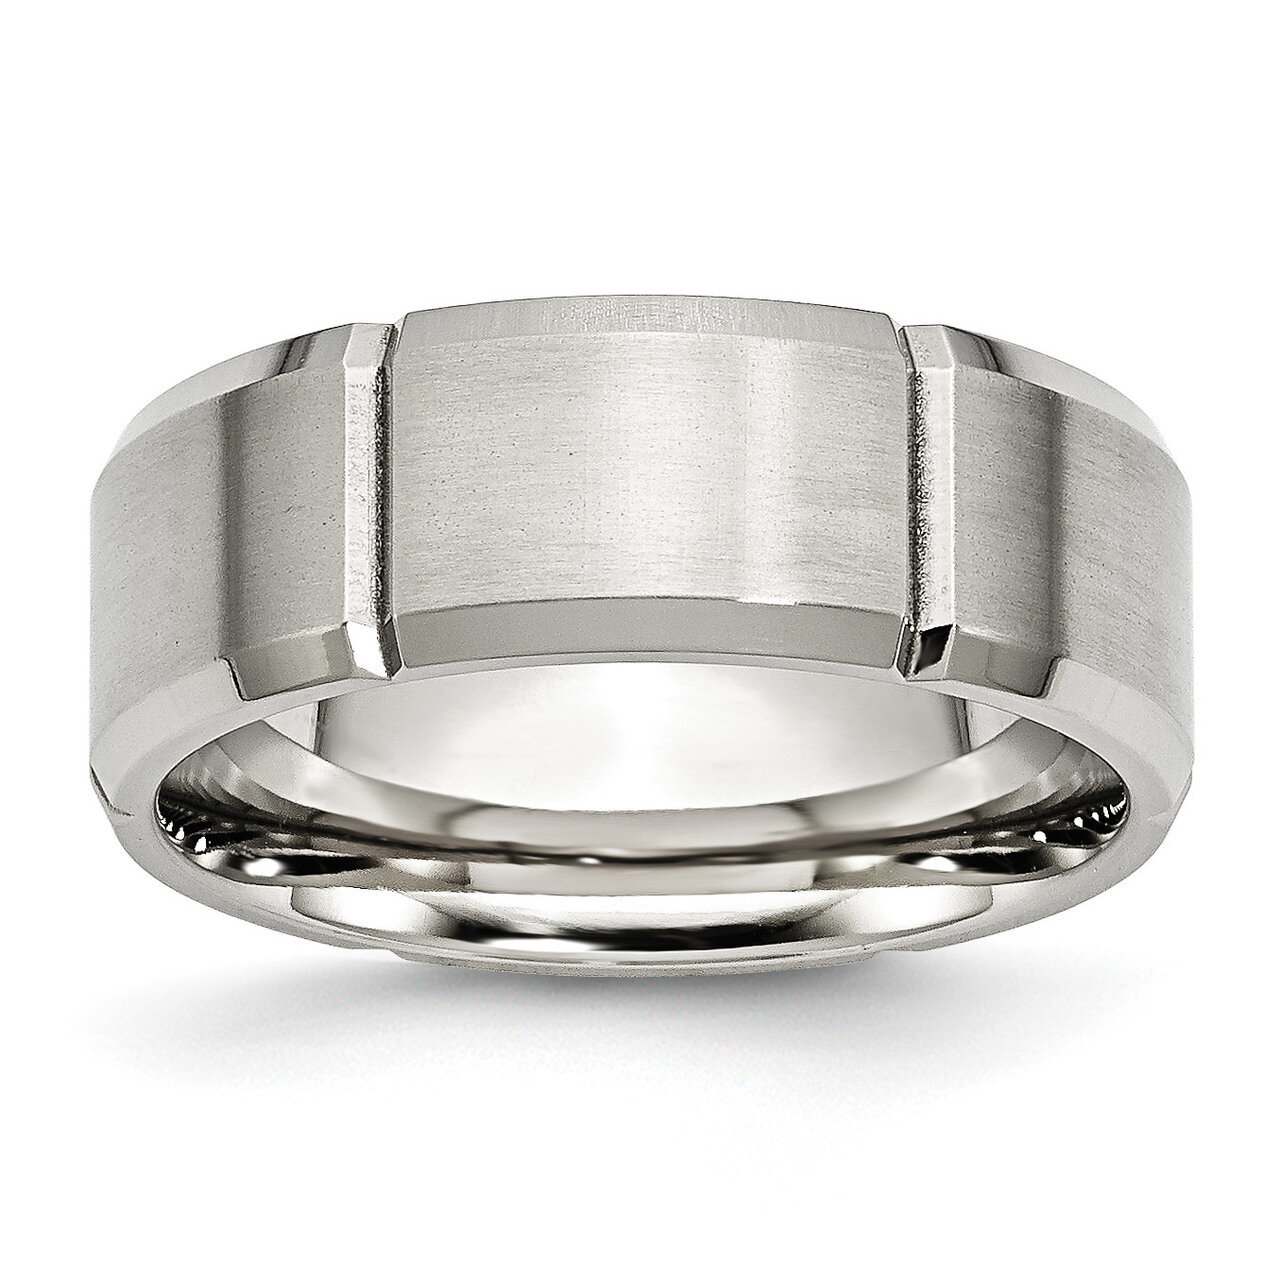 Stainless Steel Beveled Edge Grooved 8mm Brushed Polished Band Stainless Steel Beveled Edge SR108